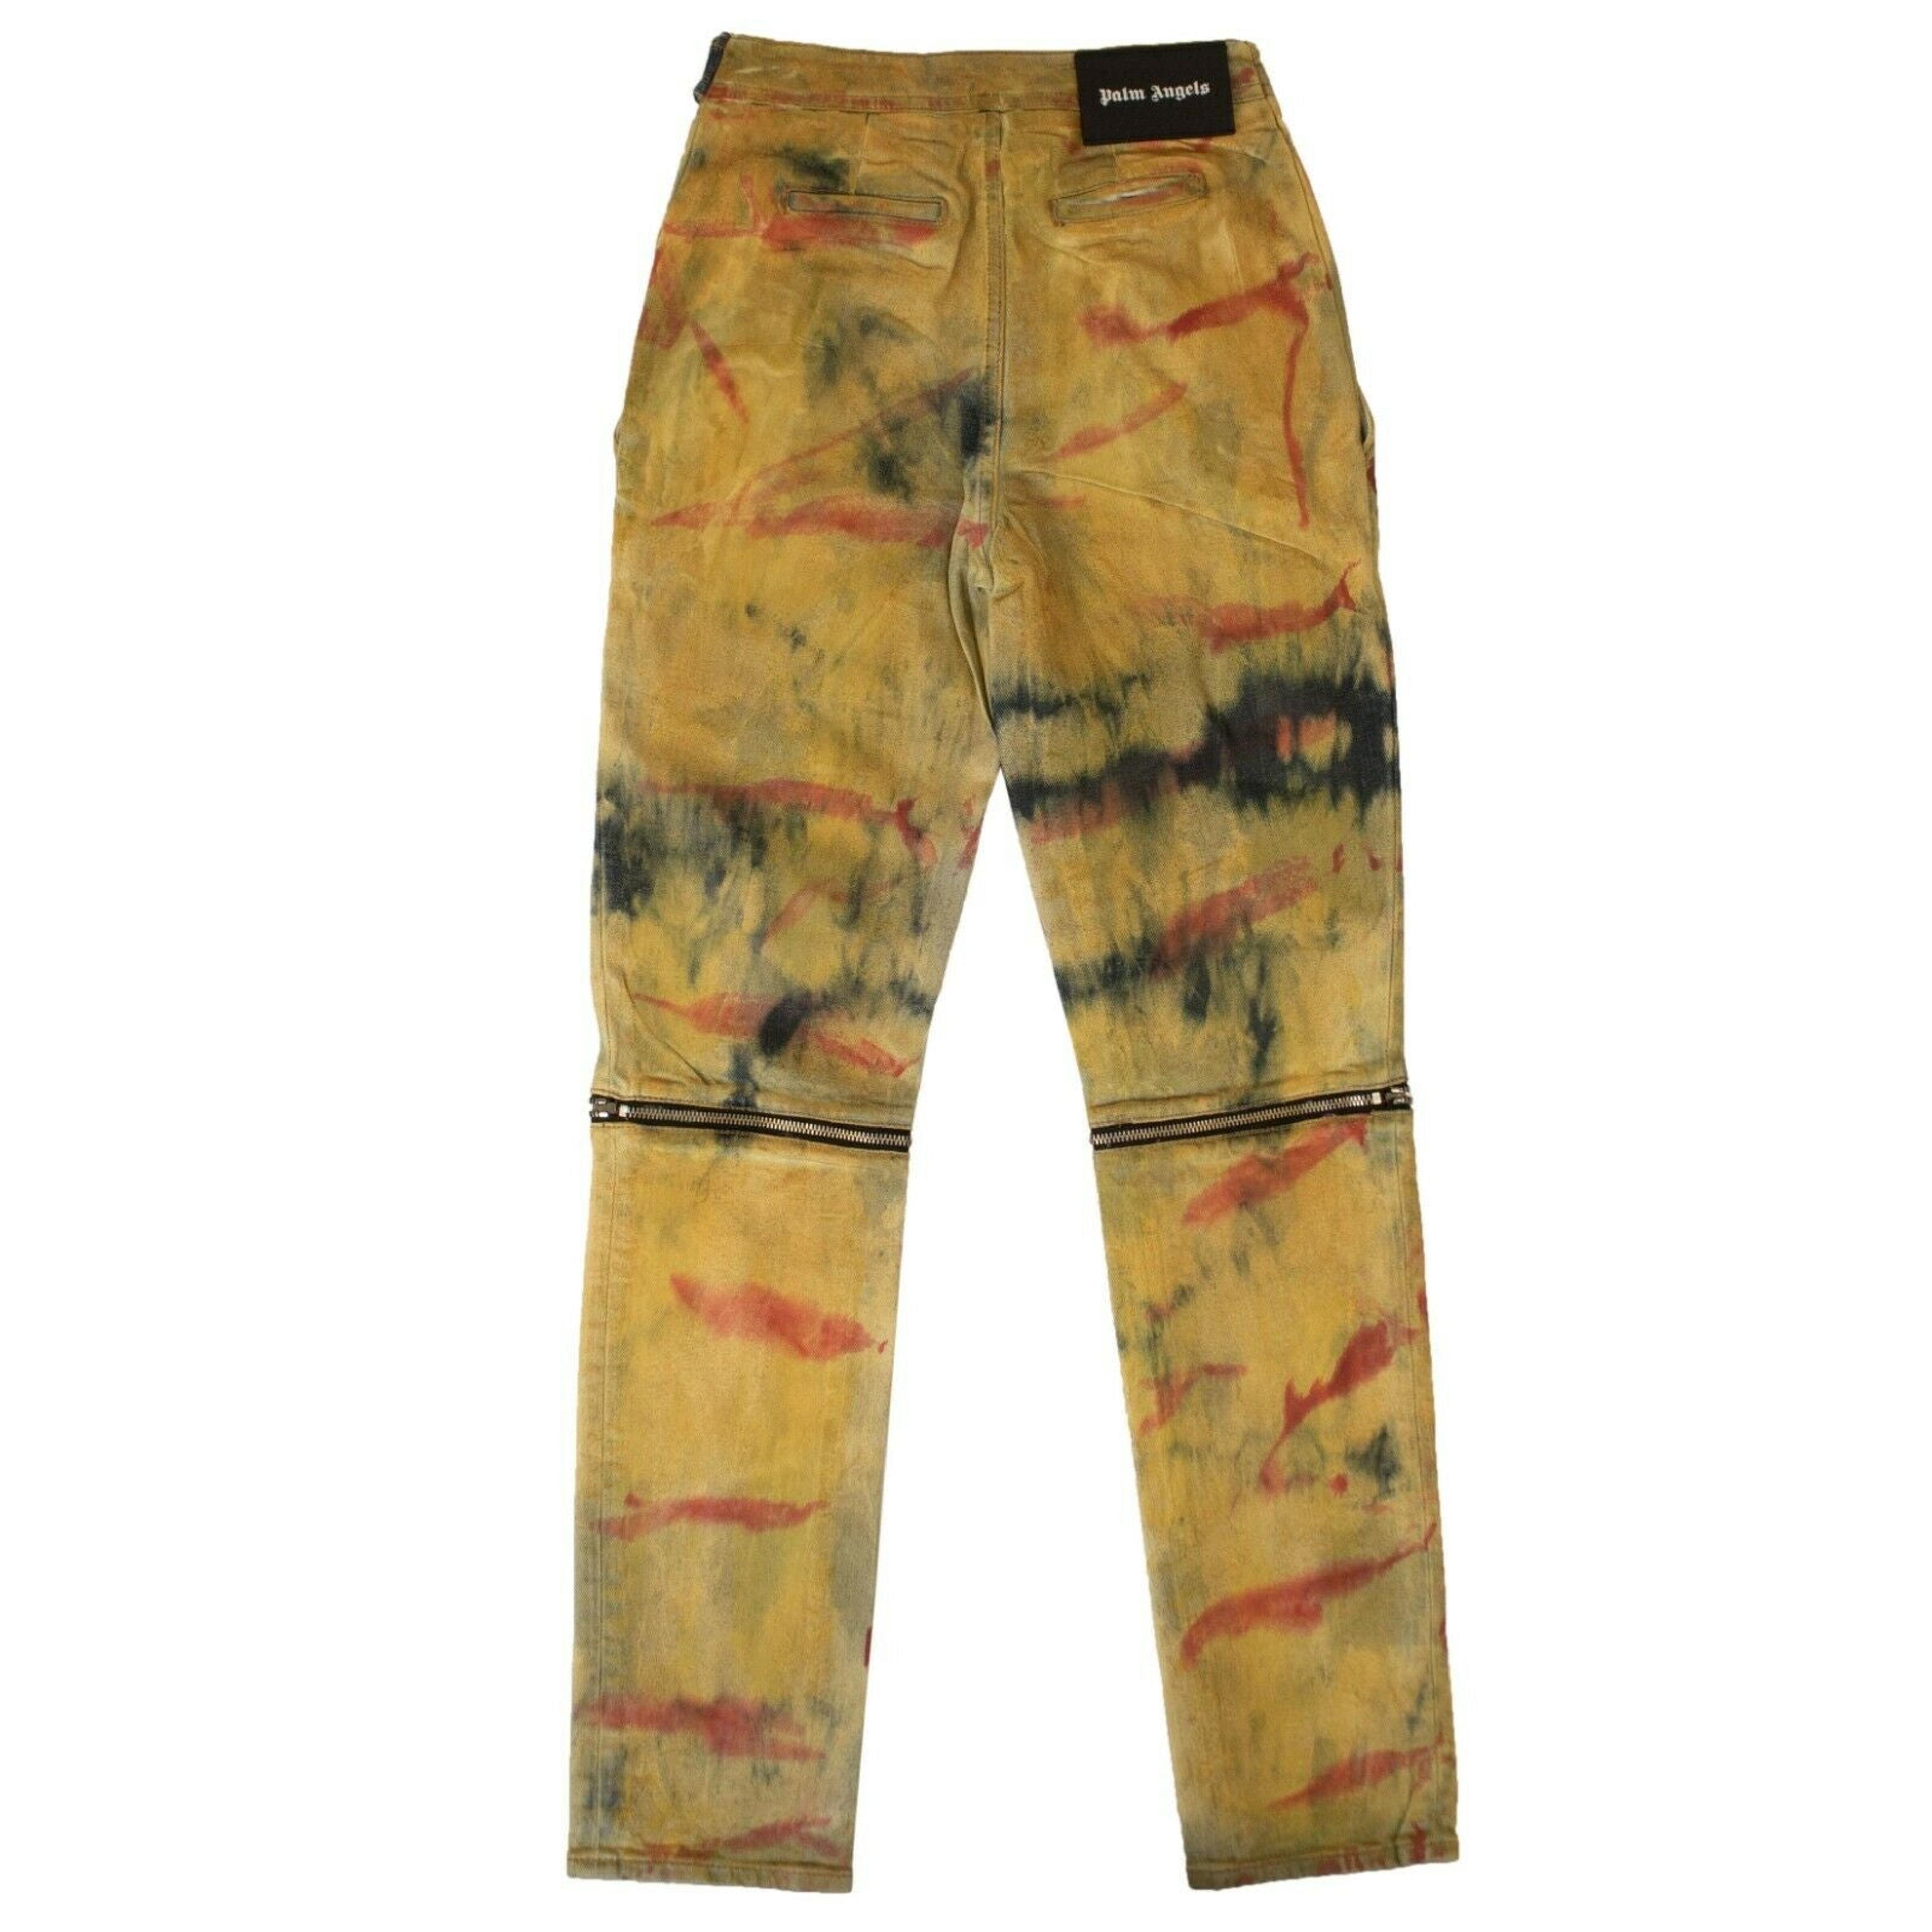 Alternate View 1 of Palm Angels Tie Dye Jeans Pants - Yellow